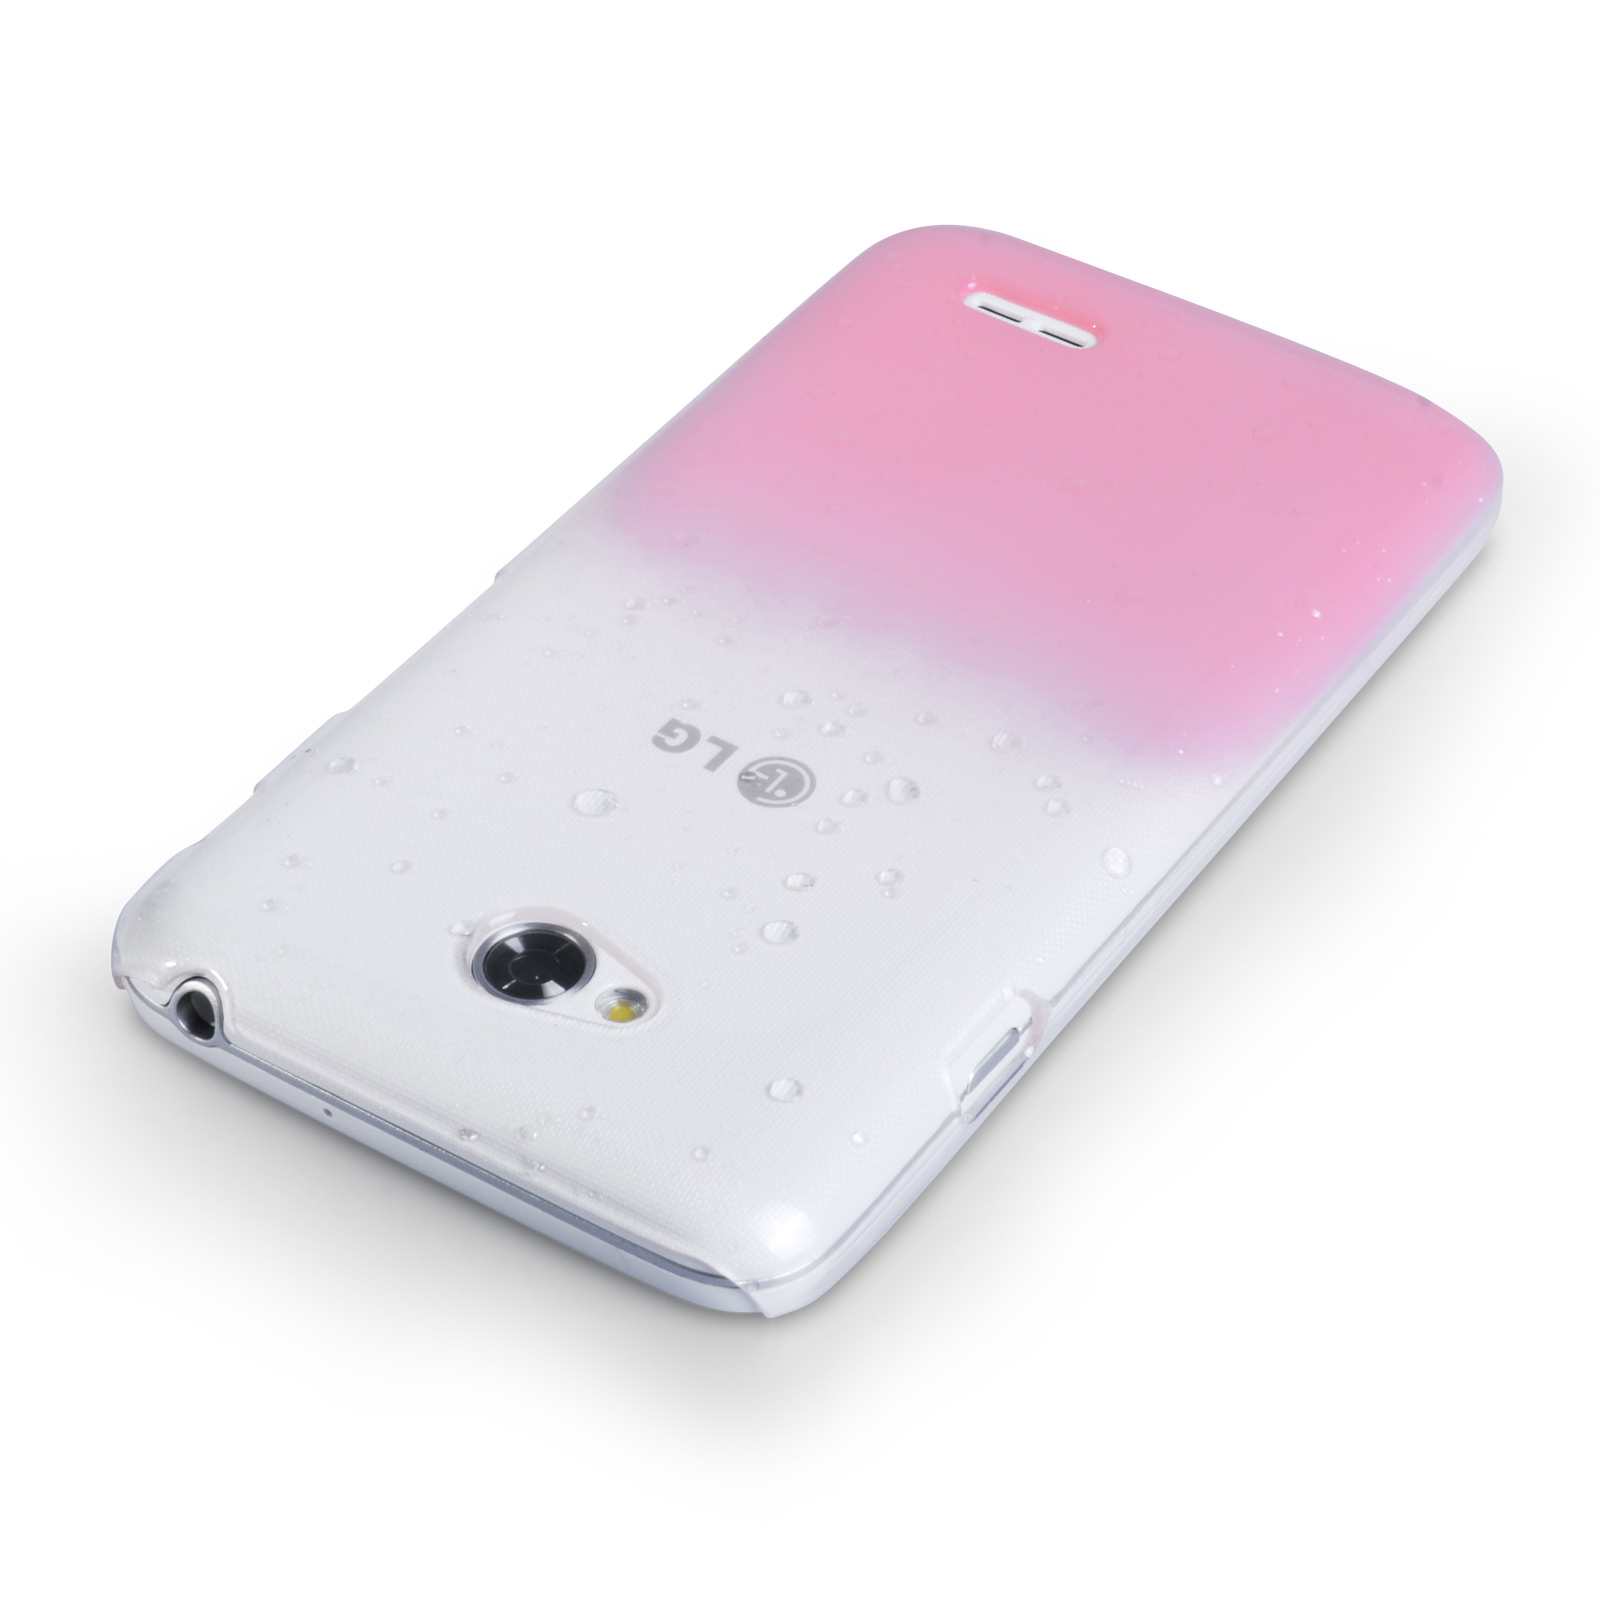 YouSave Accessories LG L70 Raindrop Hard Case - Baby Pink-Clear